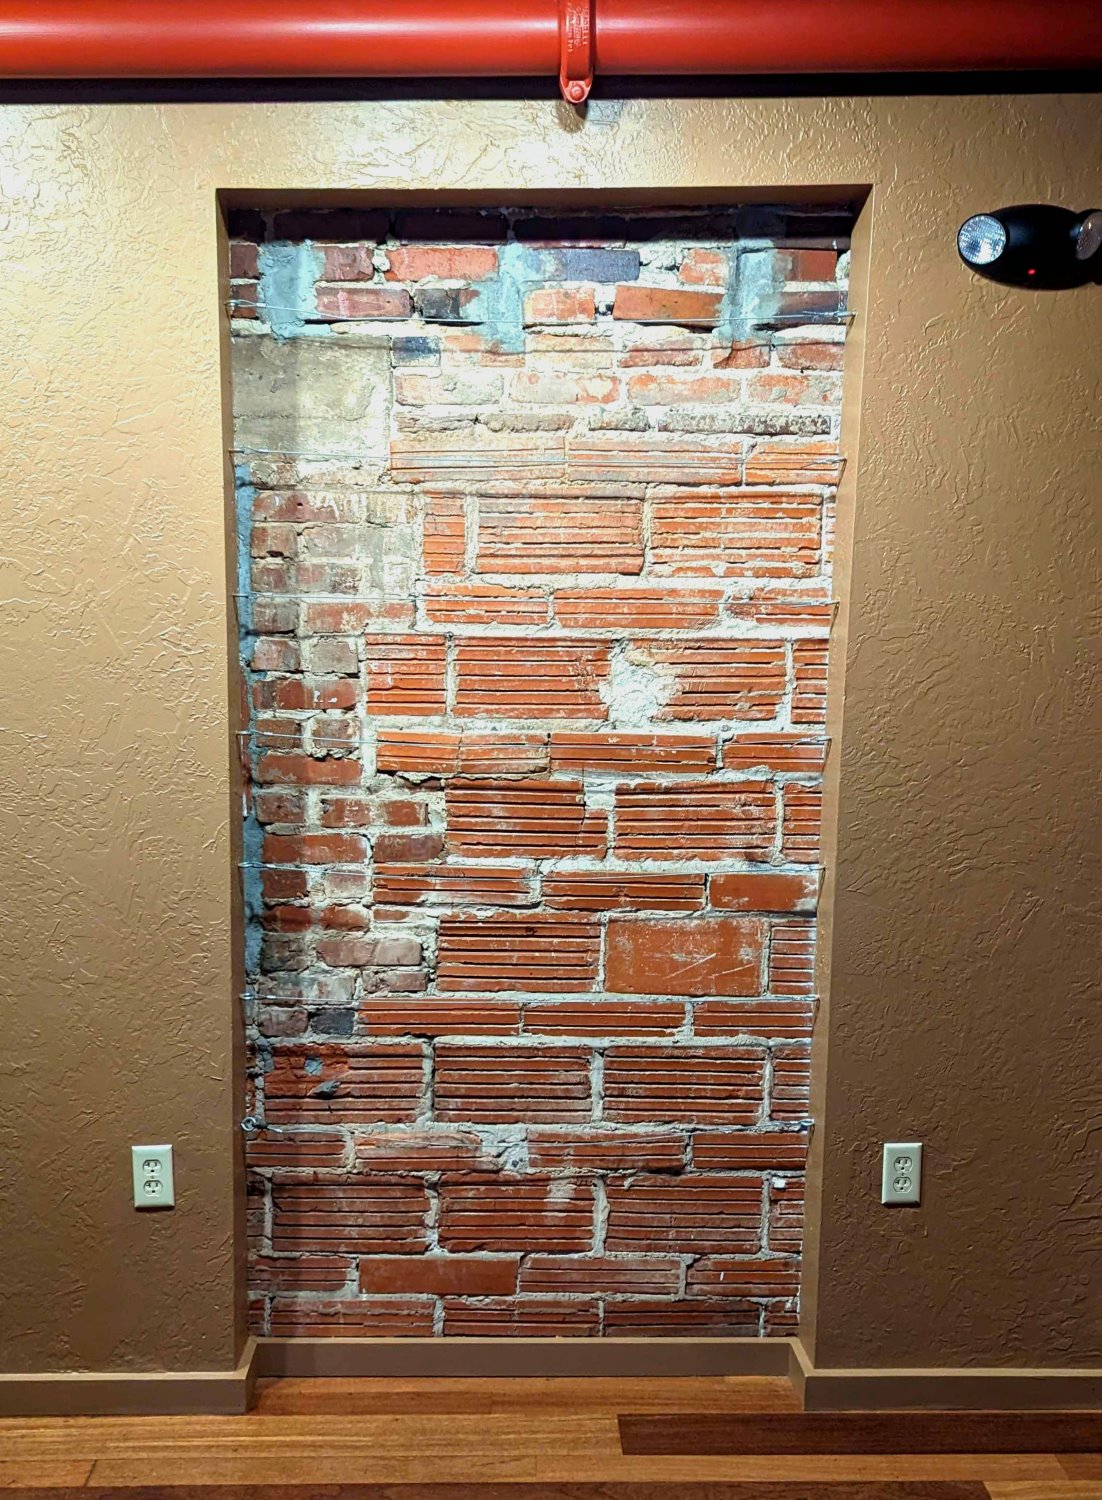 Upstairs on the SOUTH side of NOVA 535 is a beautiful brick wall with 7 wires that clients and guests use to hang seating chart cards, photos and artwork